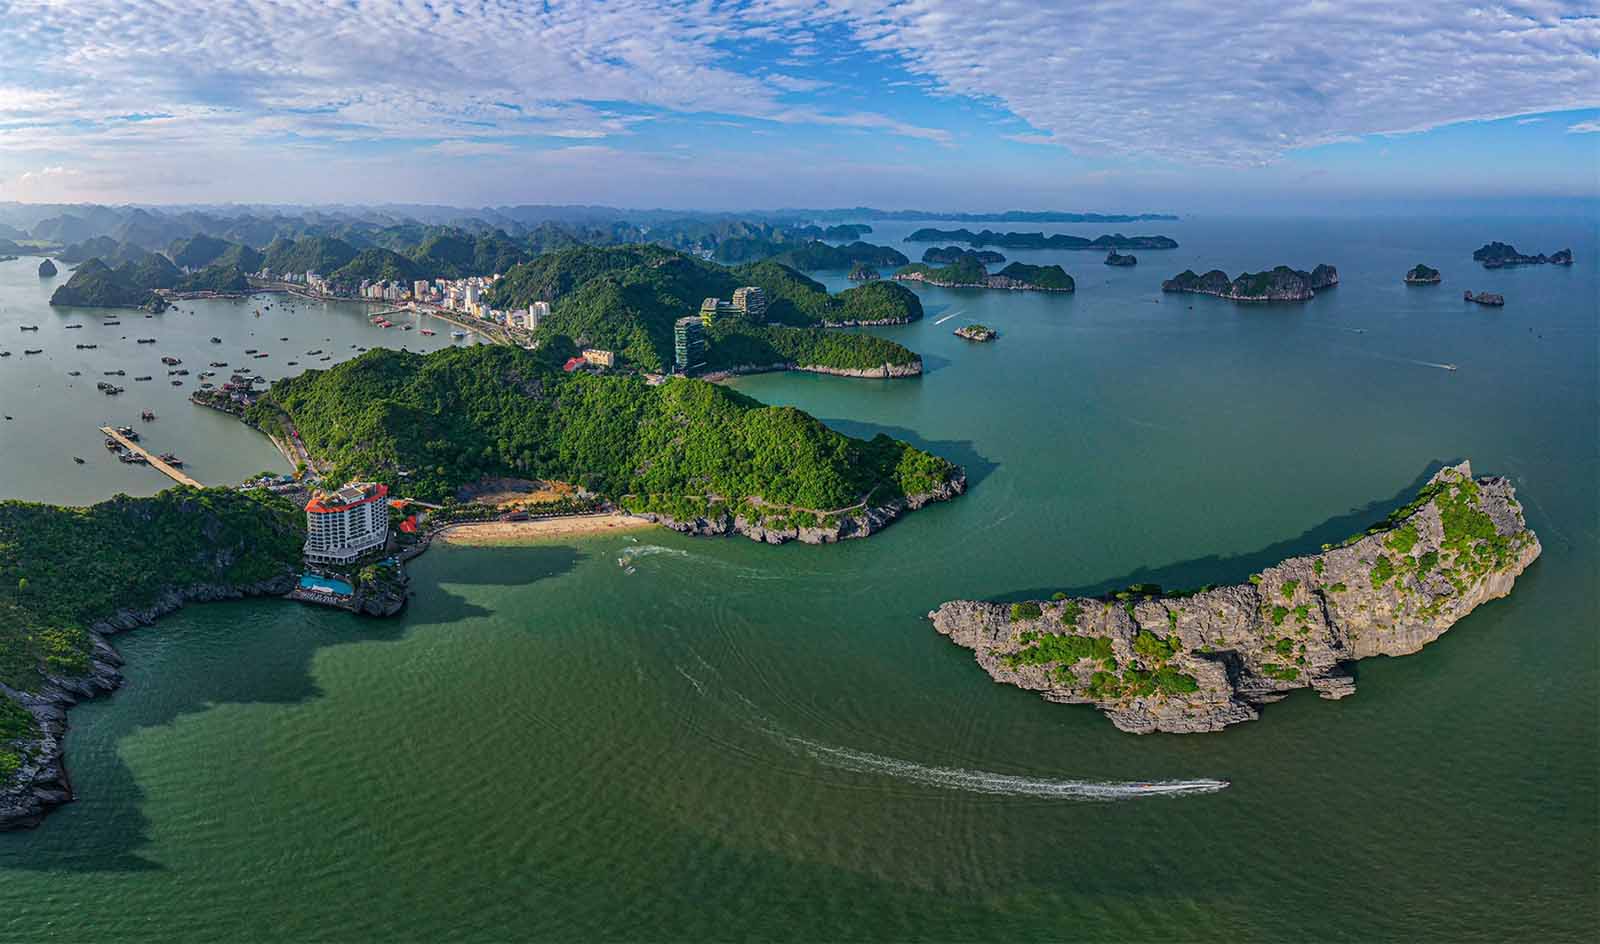 Ha Long Bay - Cat Ba archipelago is recognized as a World Natural Heritage Site